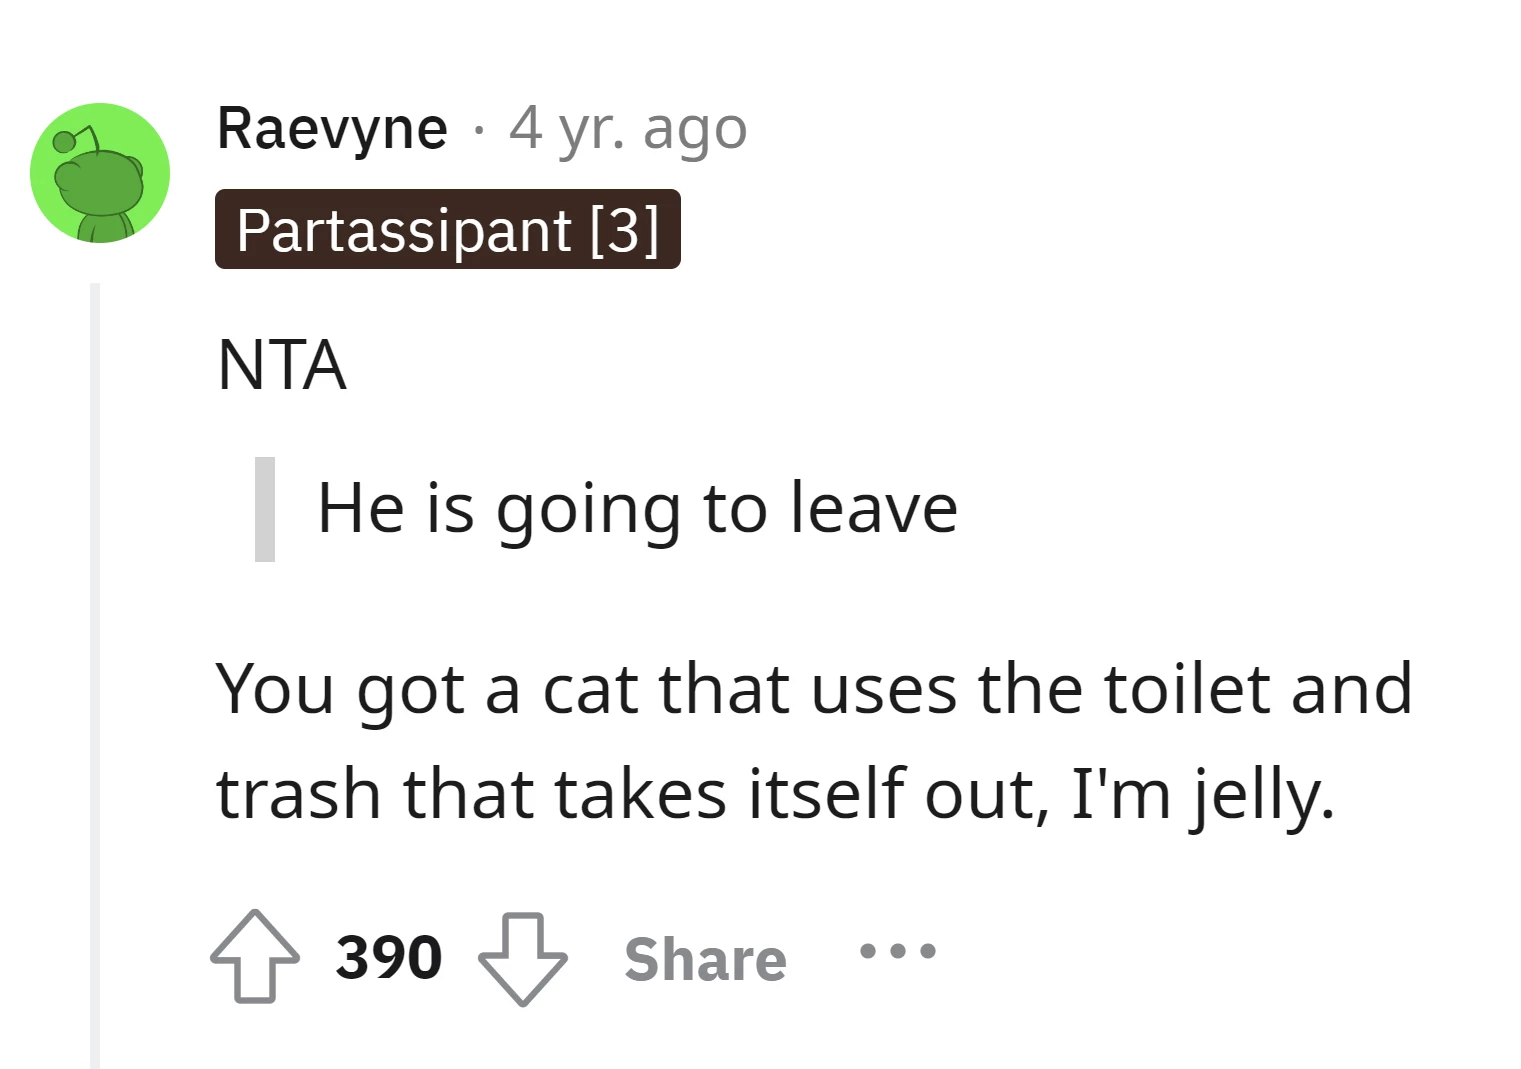 This person expresses envy for having a cat that can use the toilet